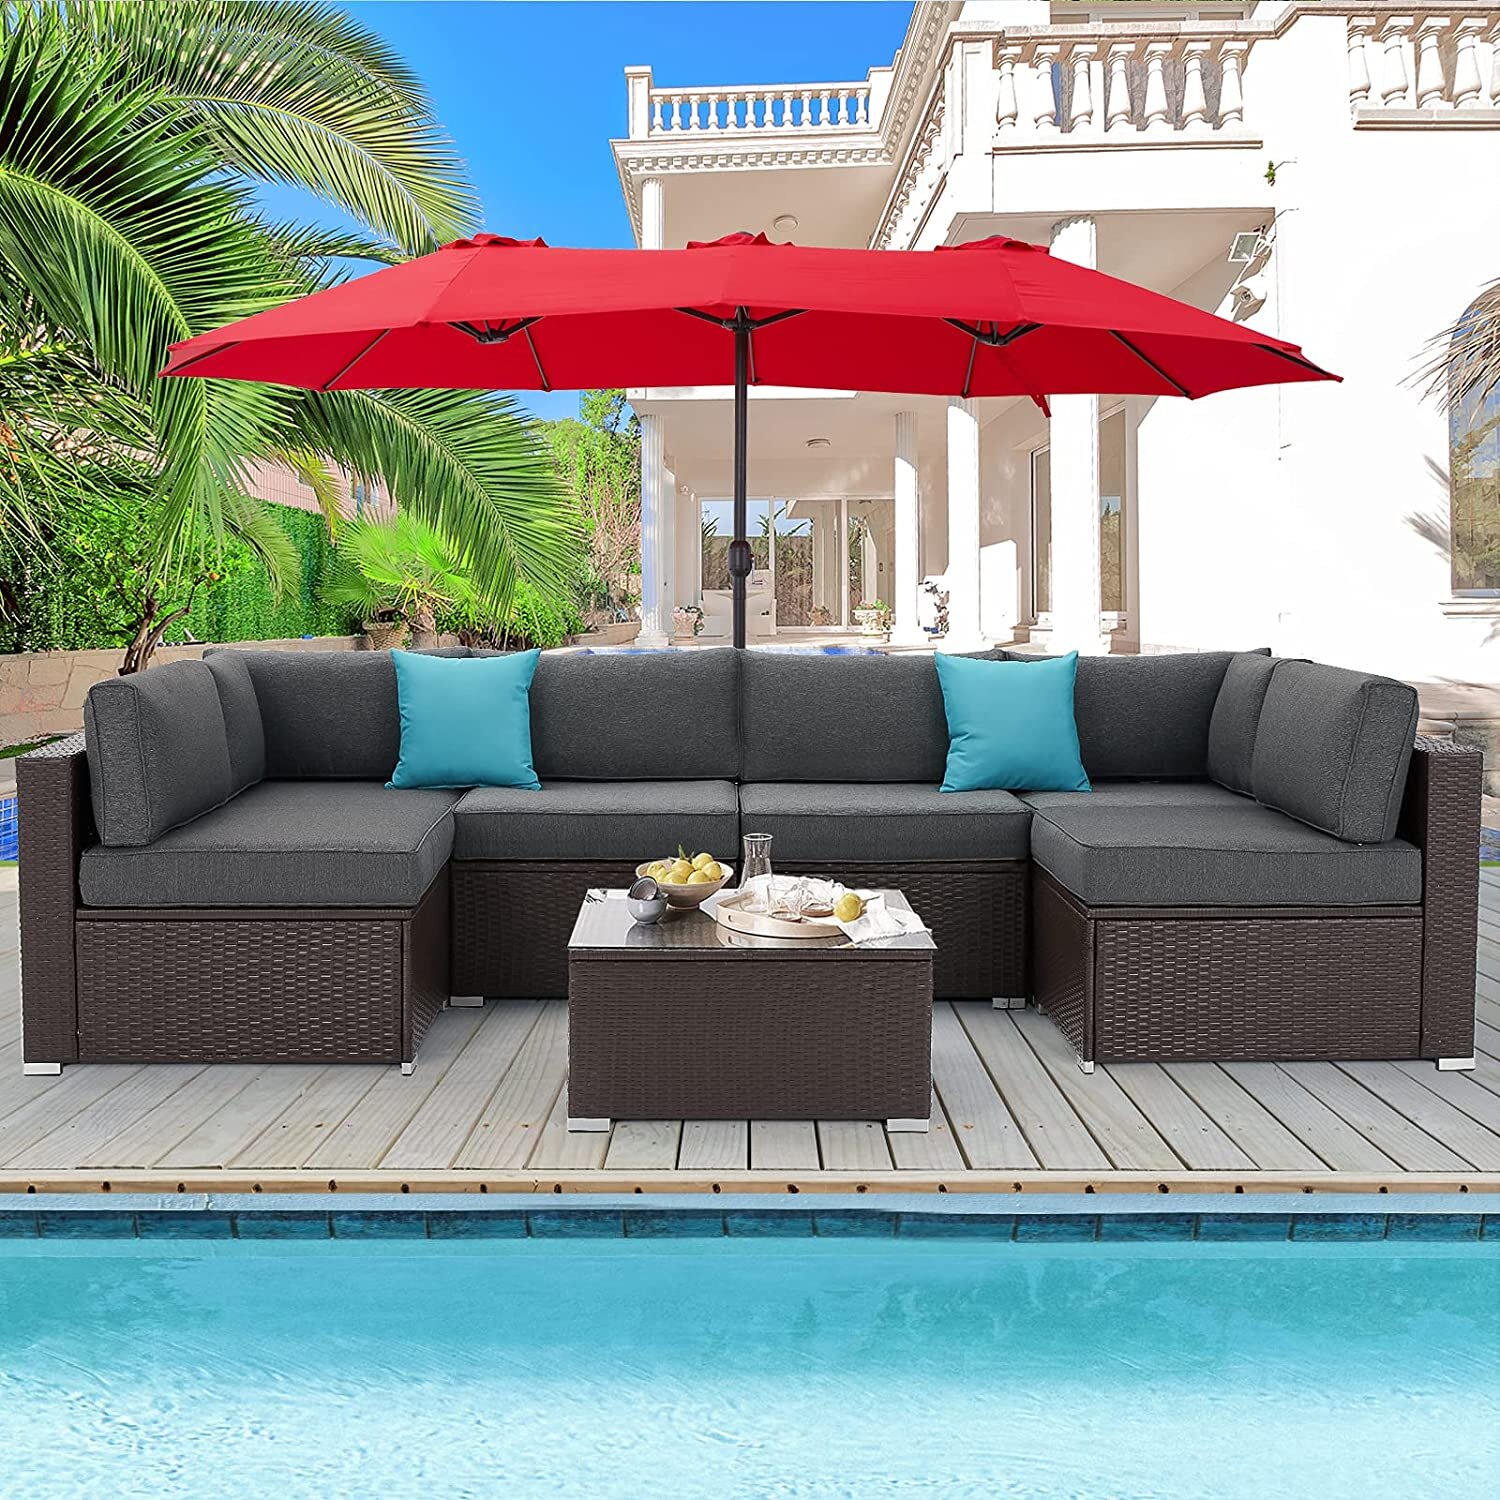 AECOJOY 6 Pieces Outdoor Patio PE Rattan Wicker Sofa Cushioned Sectional Furniture Set with Pillows